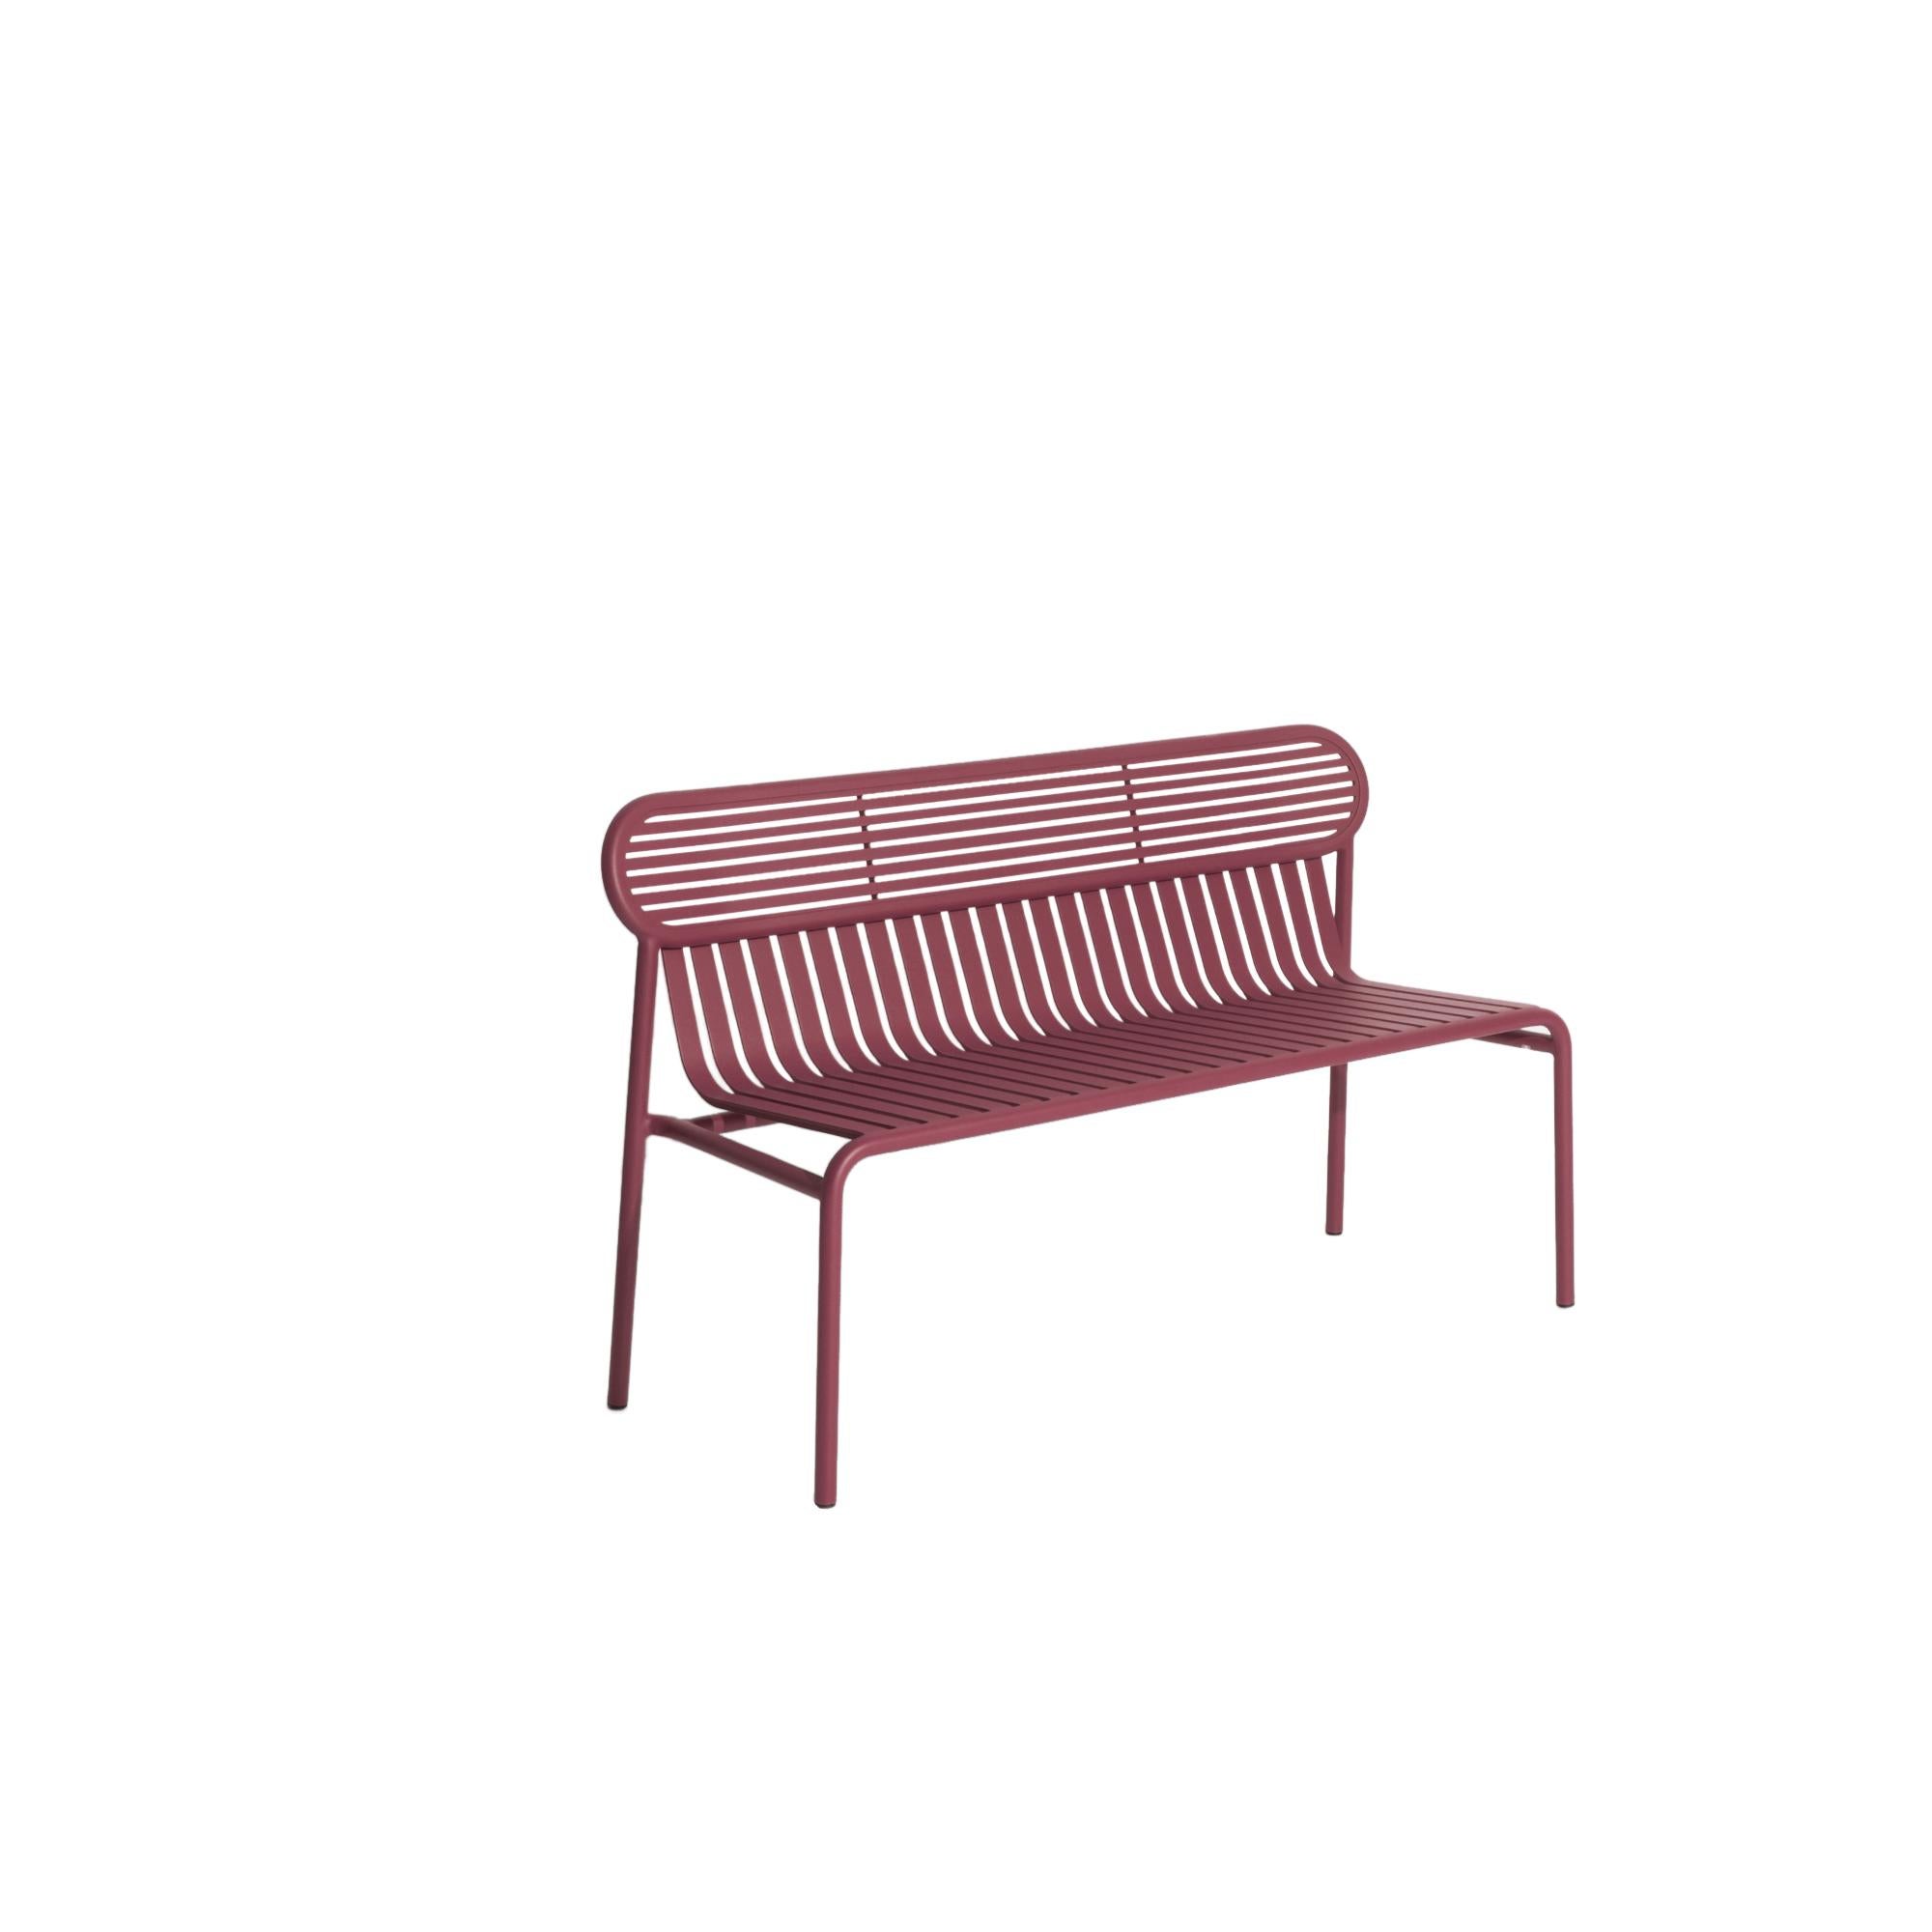 Petite Friture Week-End Bench in Burgundy Aluminium by Studio BrichetZiegler, 2017

The week-end collection is a full range of outdoor furniture, in aluminium grained epoxy paint, matt finish, that includes 18 functions and 8 colours for the